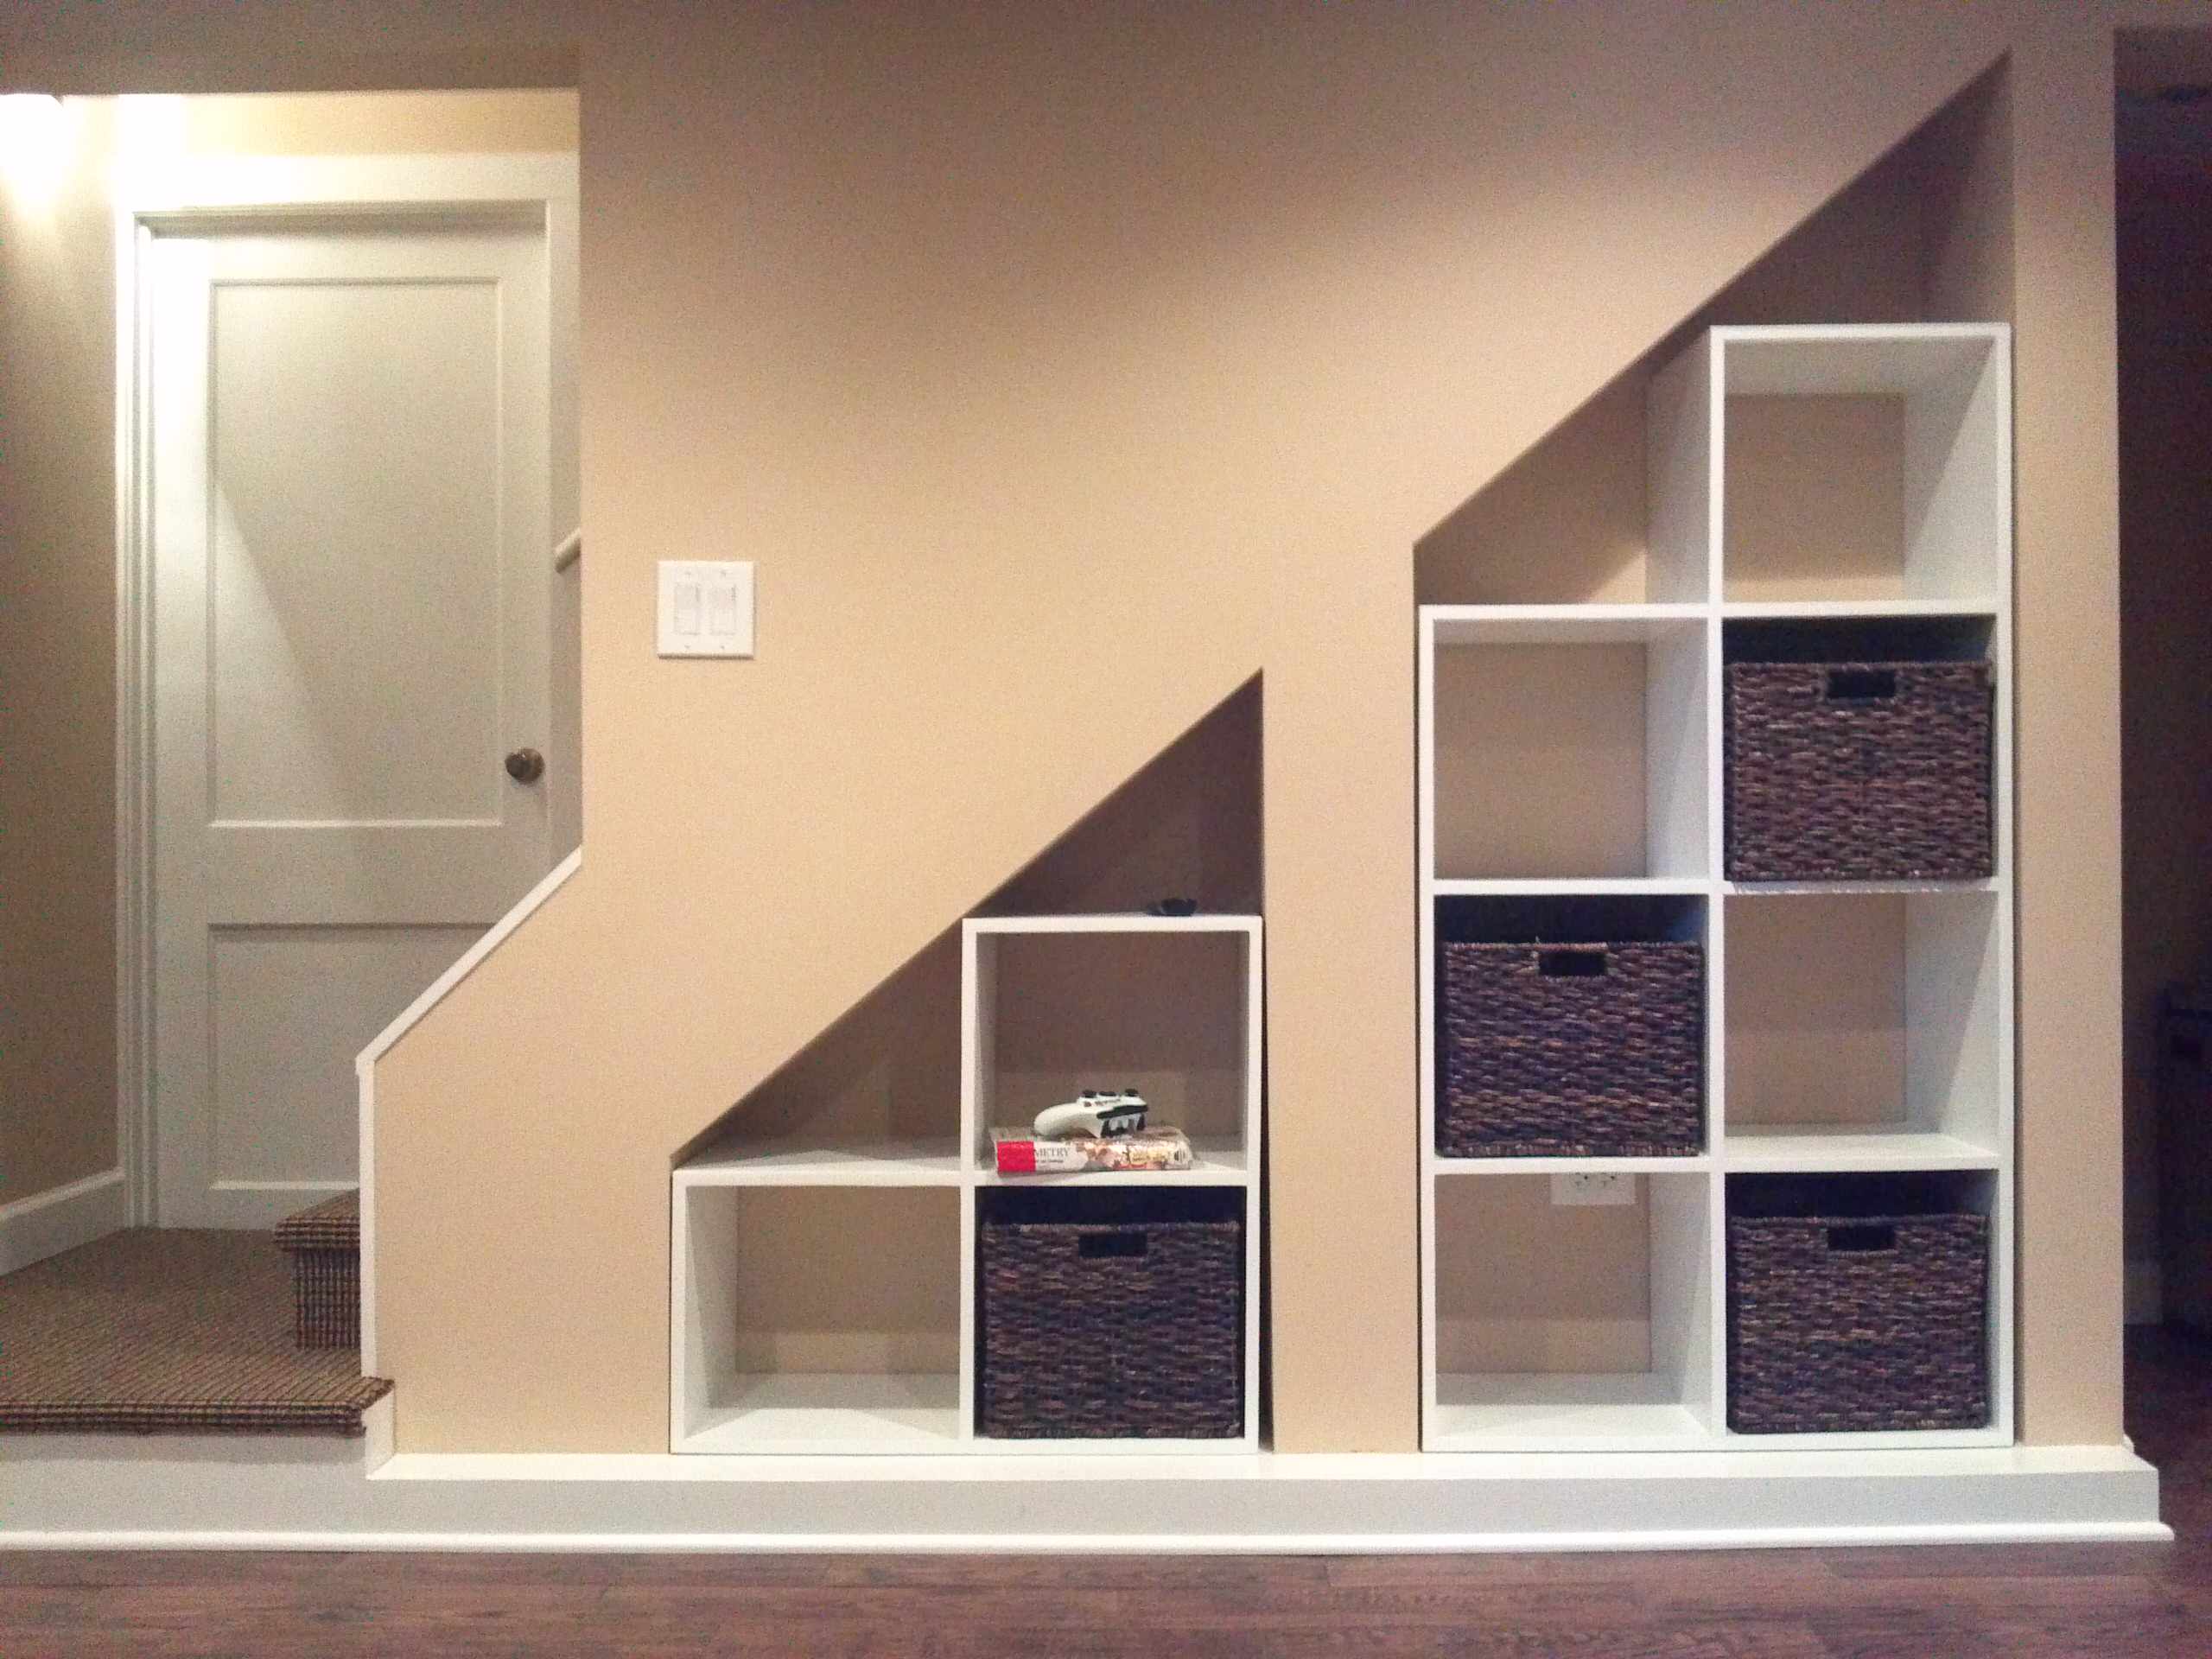 Traditional Basement Pictures Ideas, How To Build Shelves Under Basement Stairs